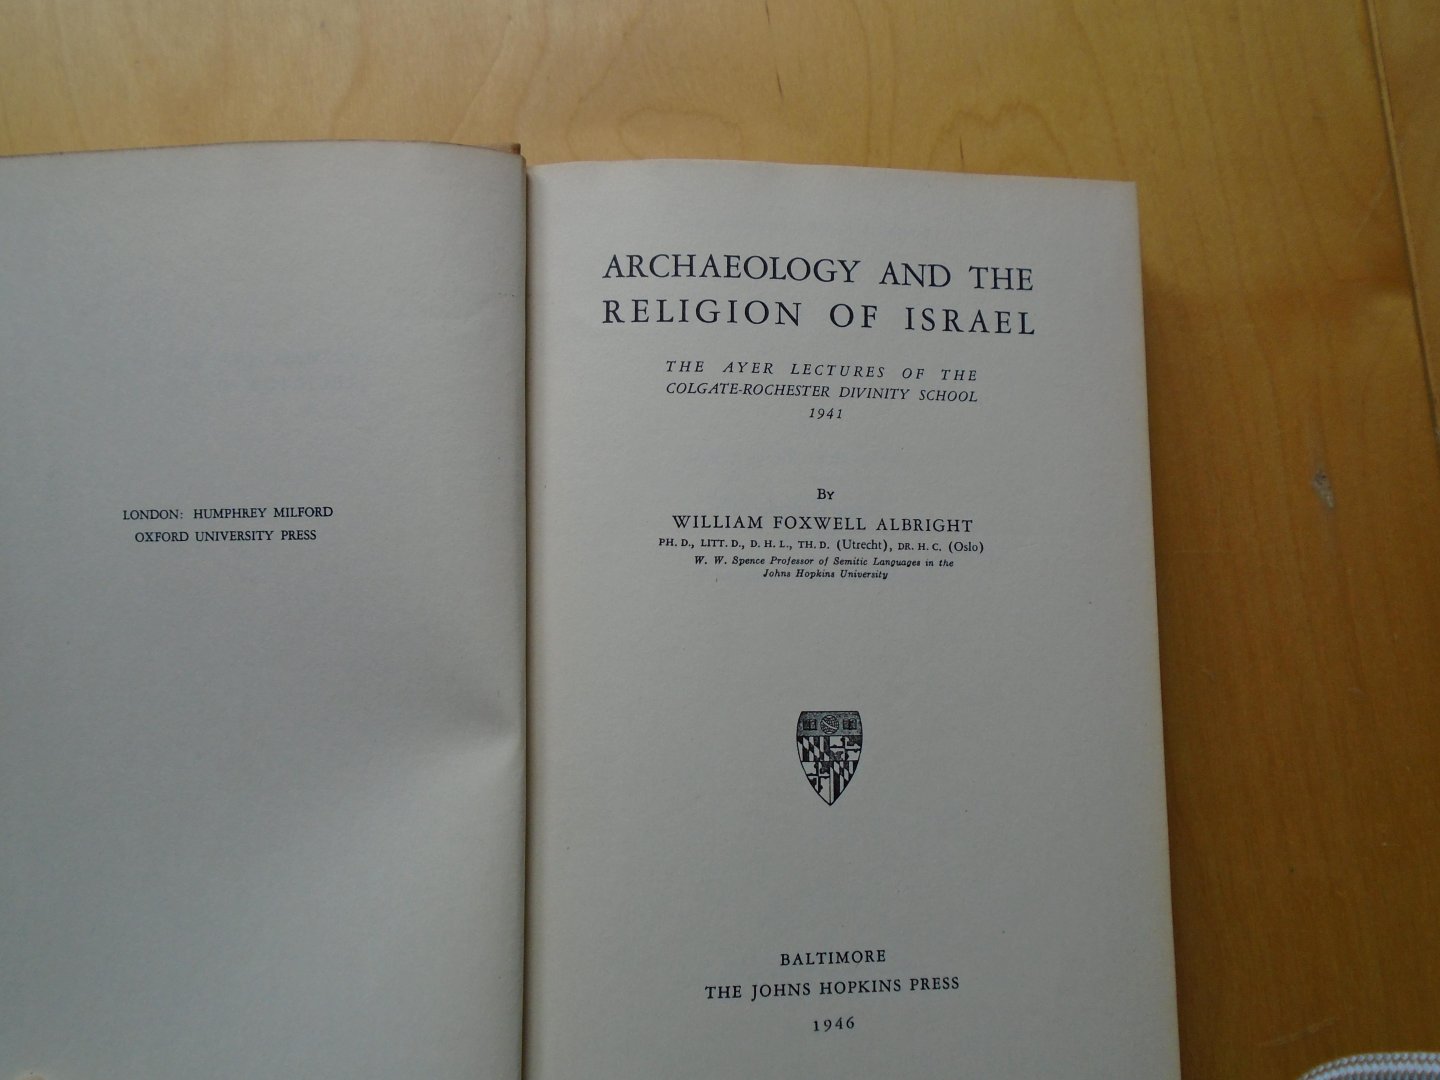 Albright, William Foxwell - Archaeology and The Religion of Israel: The Ayer lectures of the Colgate-Rochester Divinity School 1941